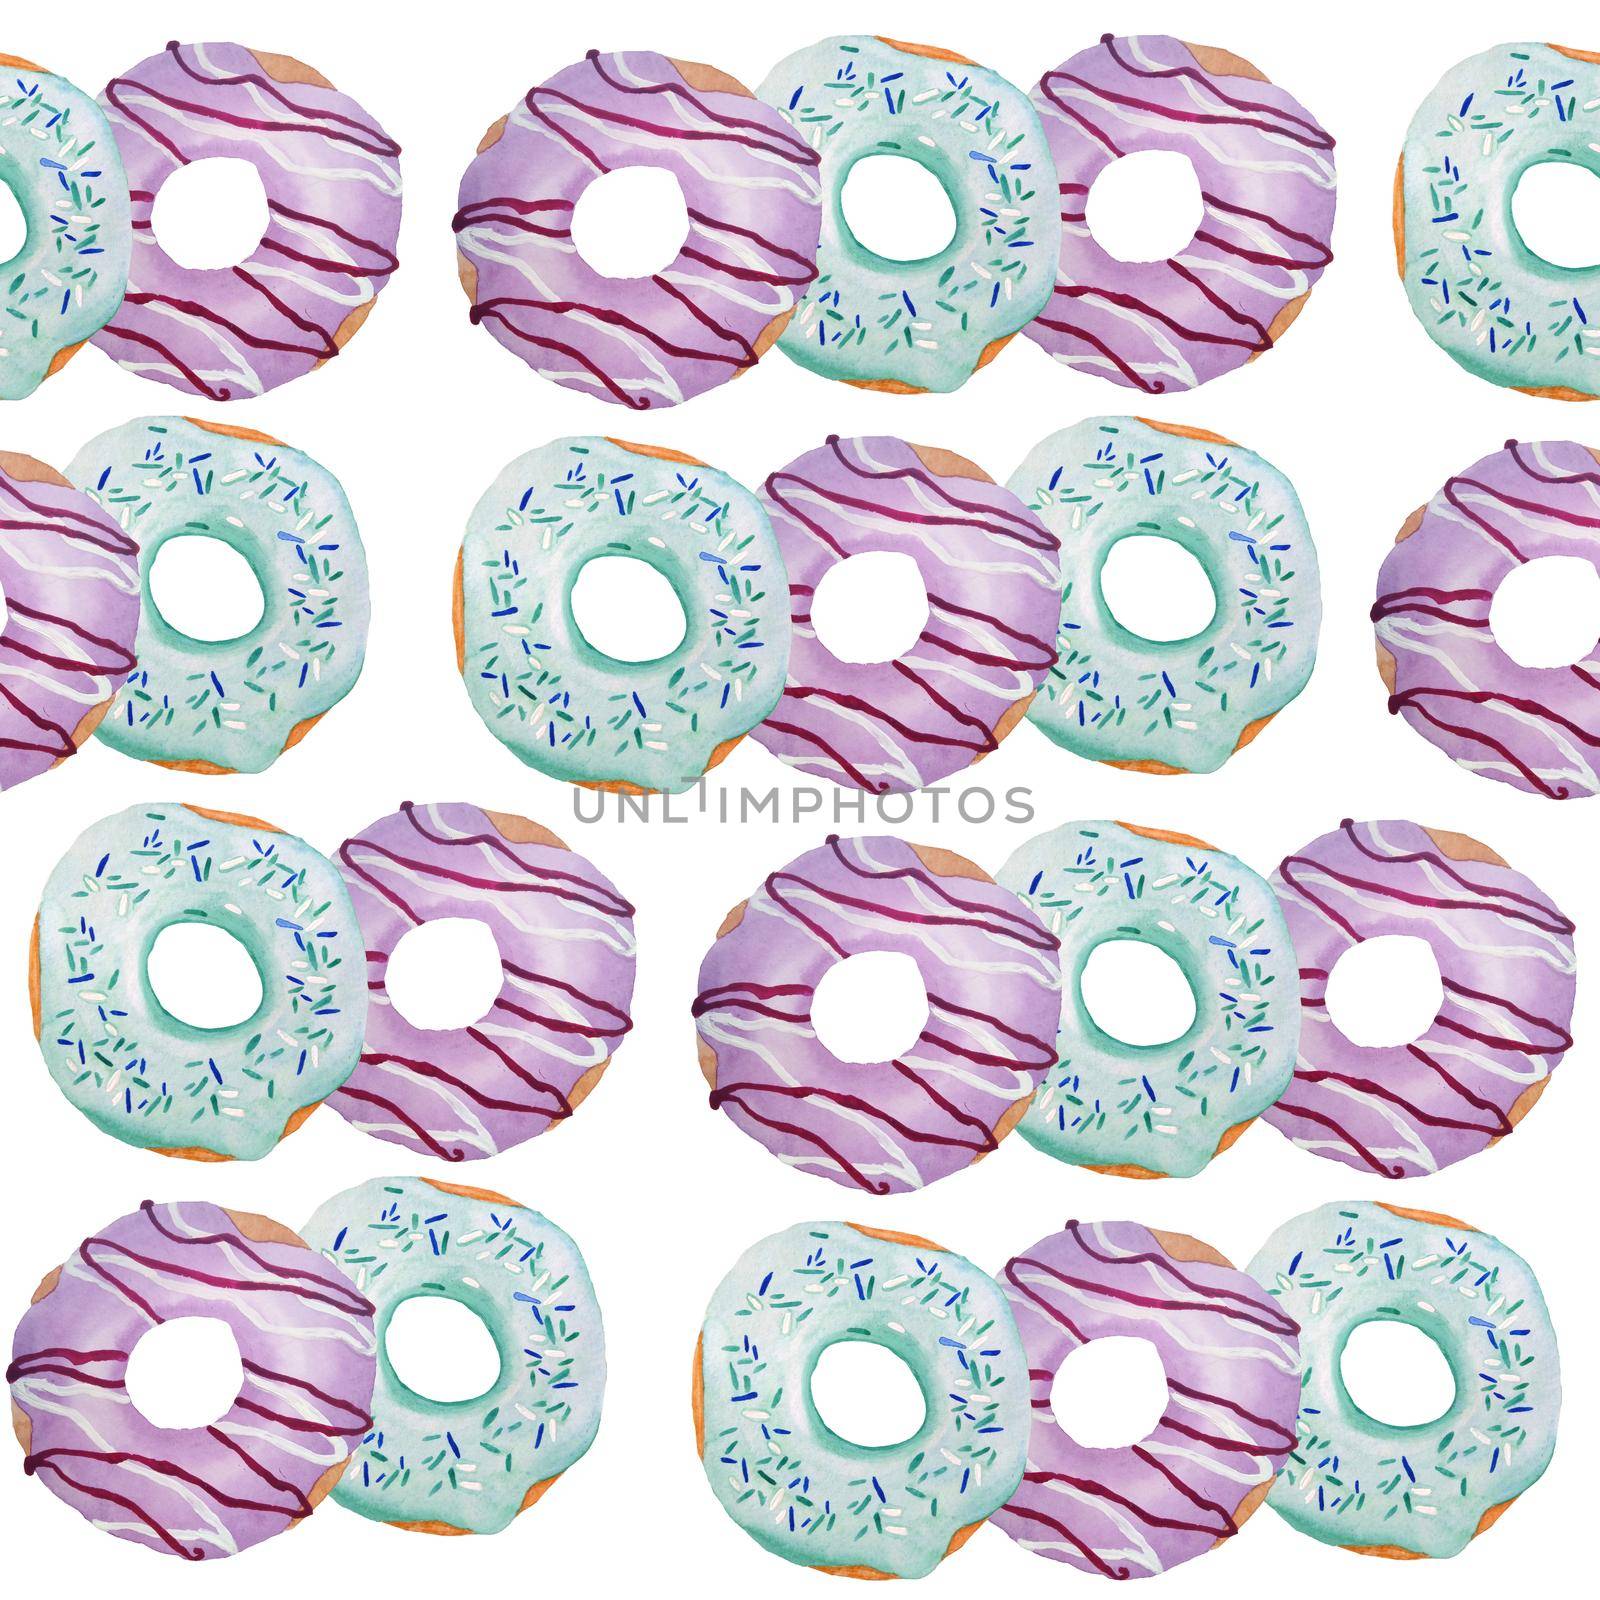 watercolor seamless hand drawn pattern of sweet delicious tasty baked pastry donuts of pink violet lavender lilac mint tiffany green colors. For cafe restaurant menu with heart love st valentine day